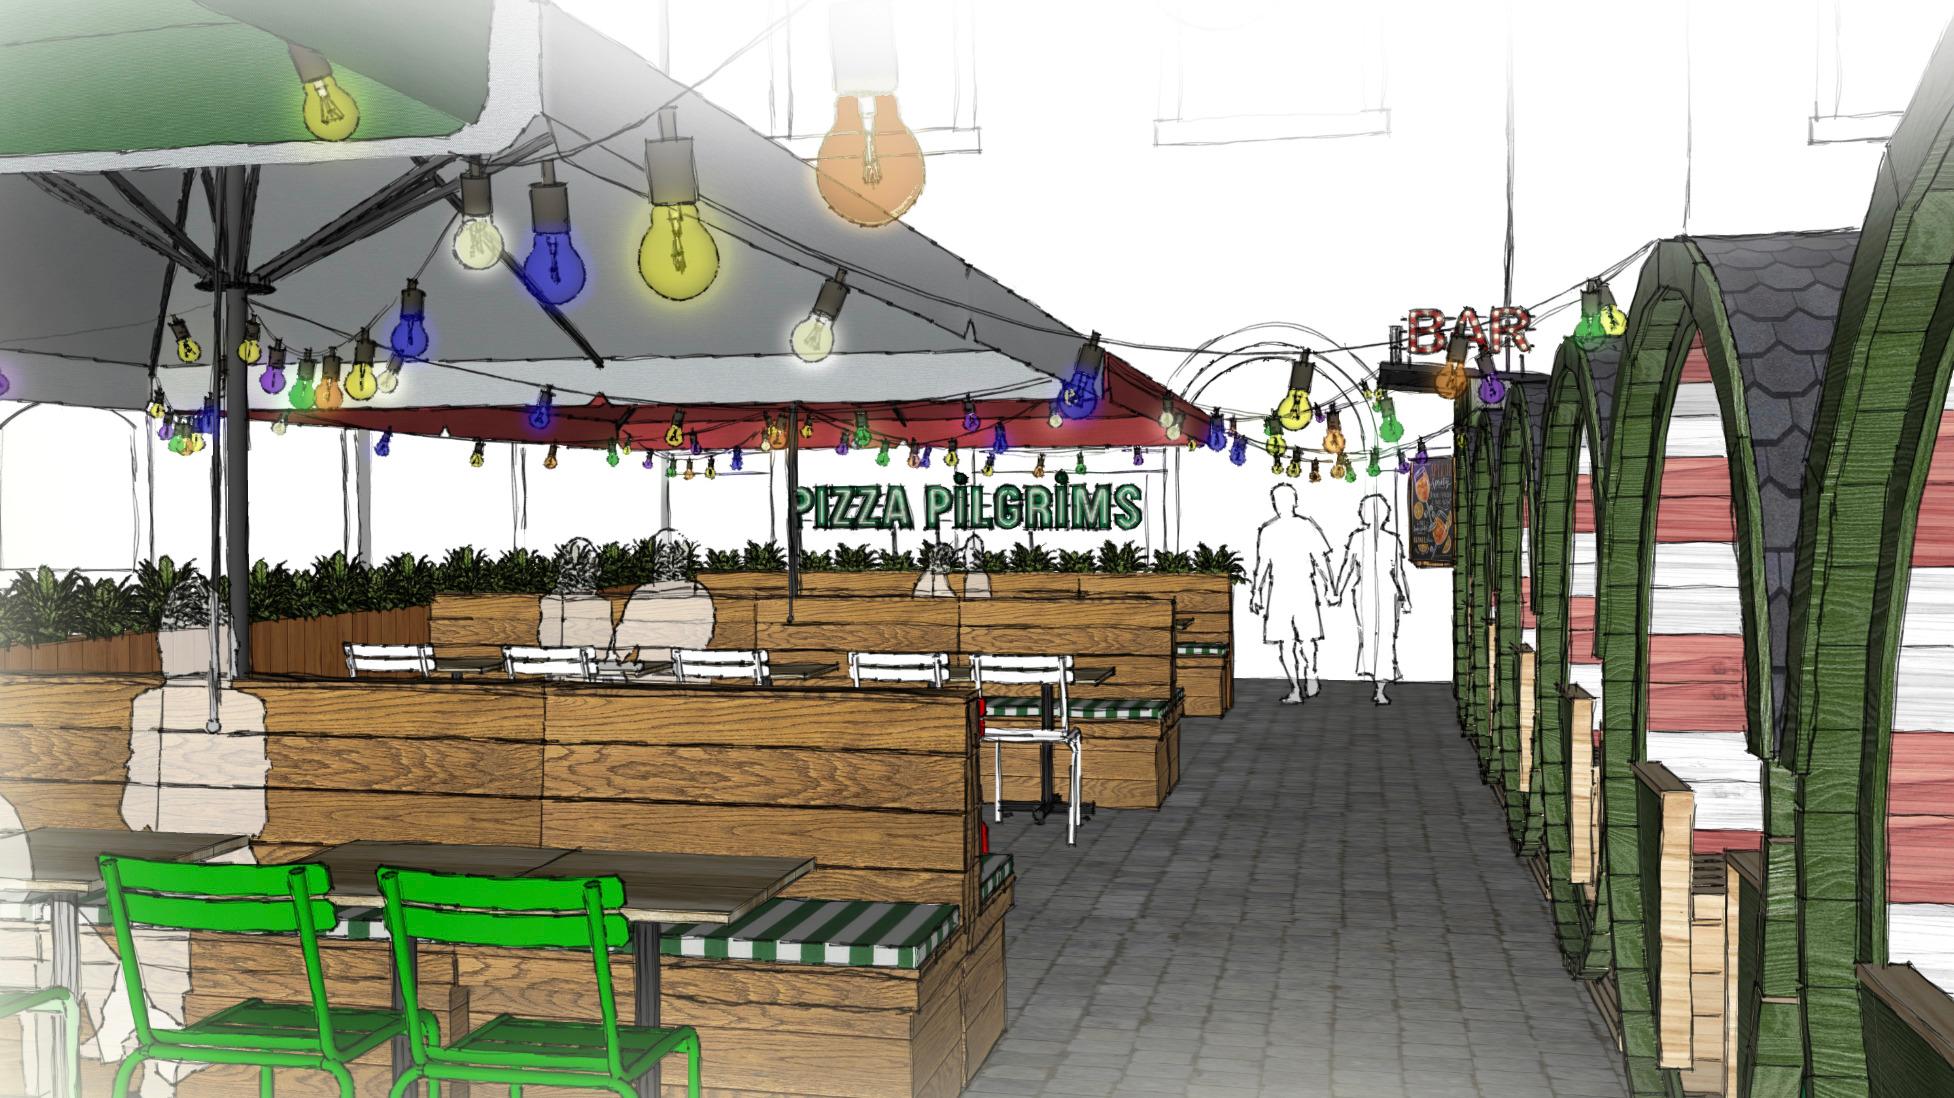 Pizza Pilgrims Canary Wharf, Coming Soon - Sunny Quay Side Terrace Summer Parties! photo #1